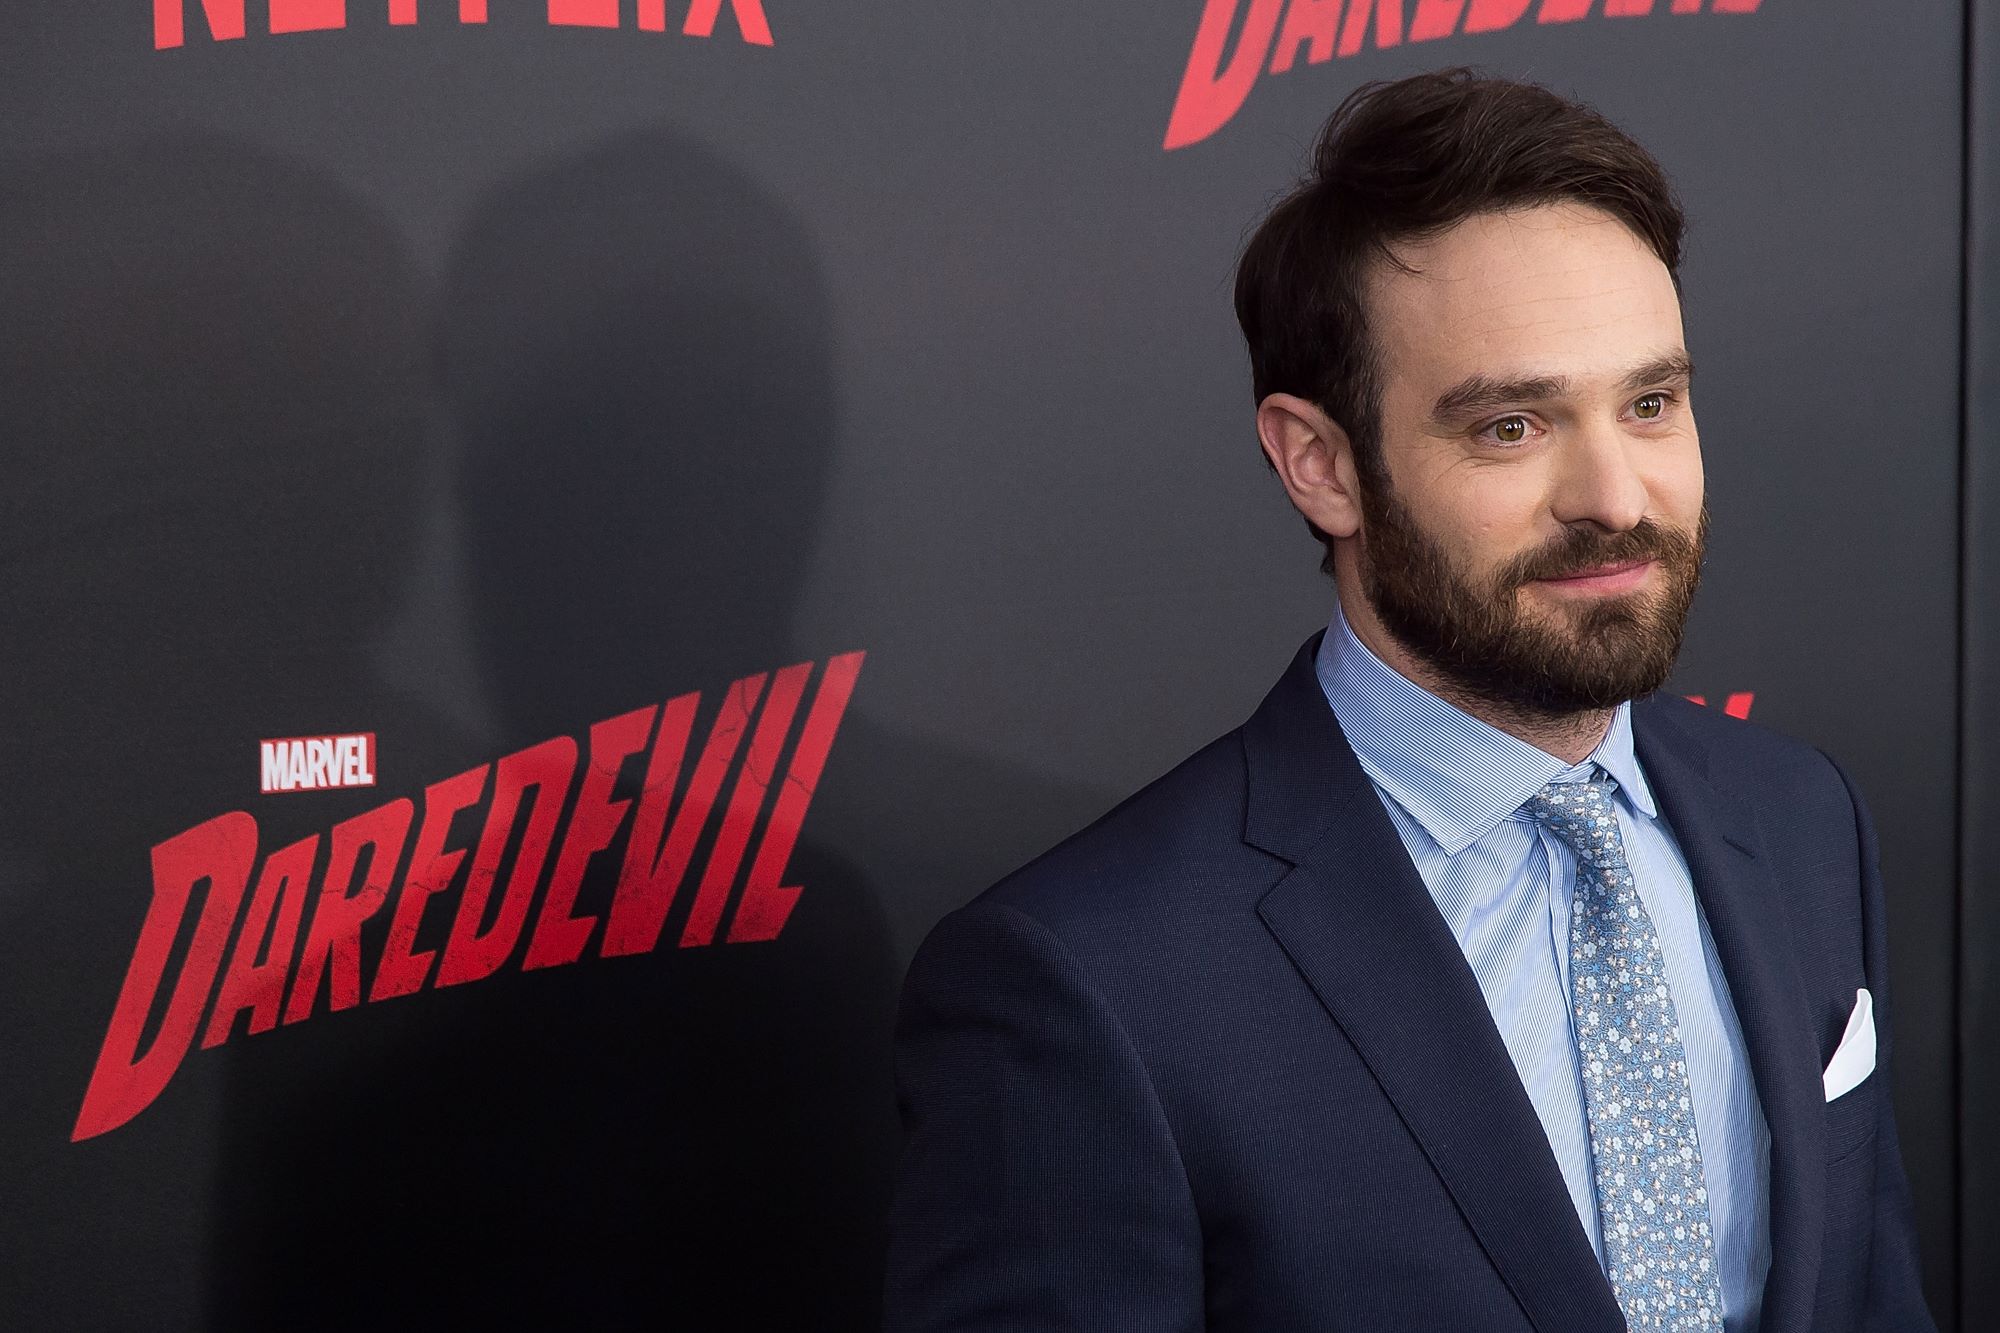 'Daredevil' star Charlie Cox wears a dark blue suit over a light blue button-up shirt and blue patterned tie.